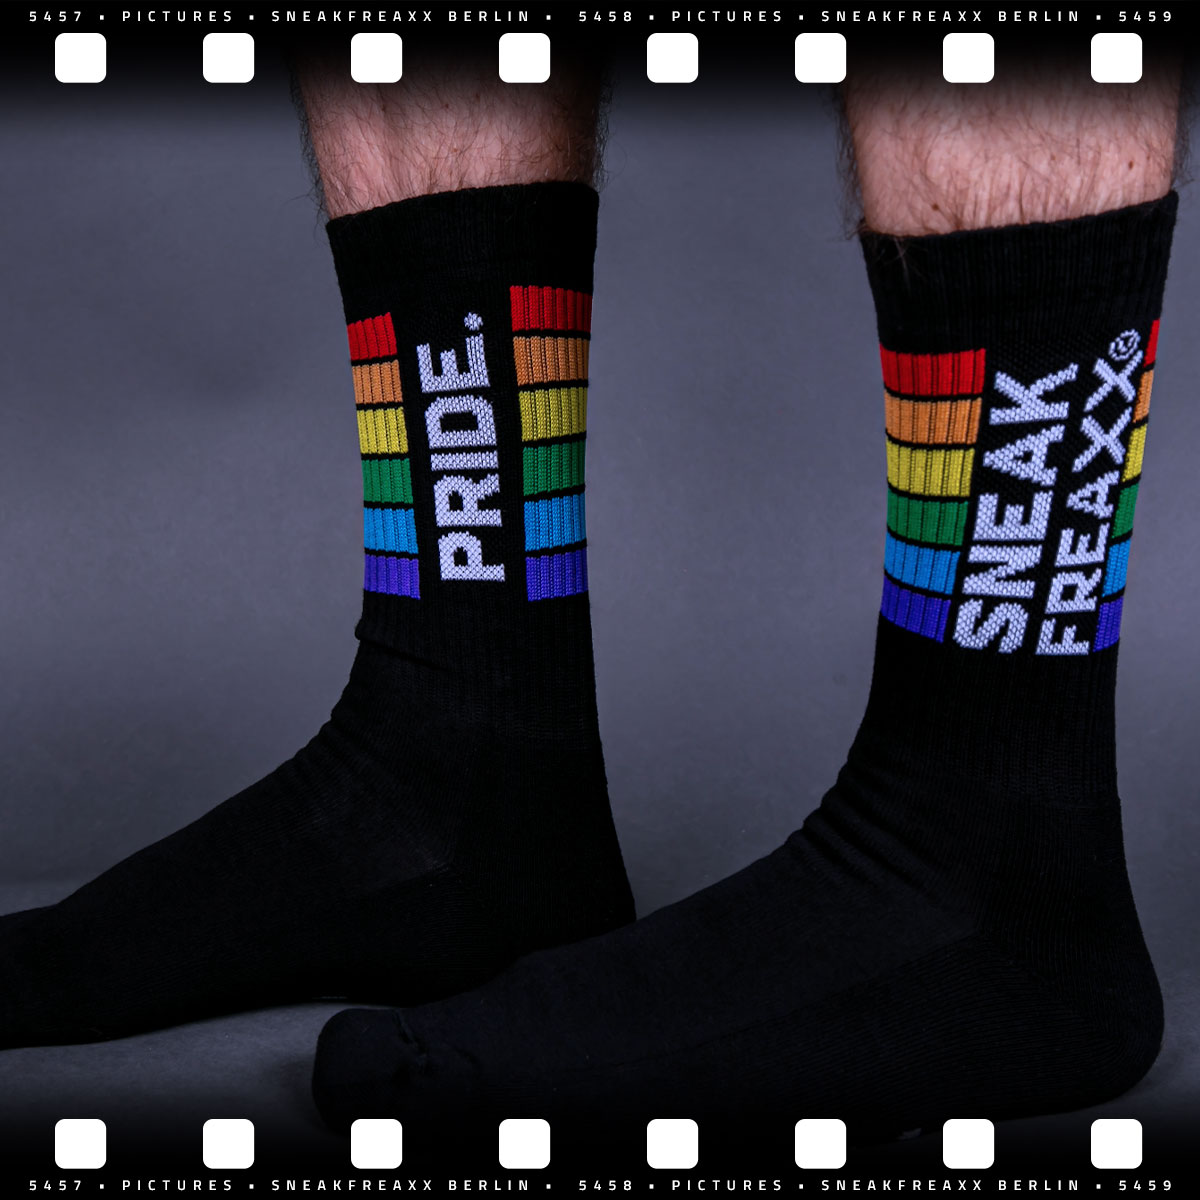 PRIDE SOXX - 2-PACK